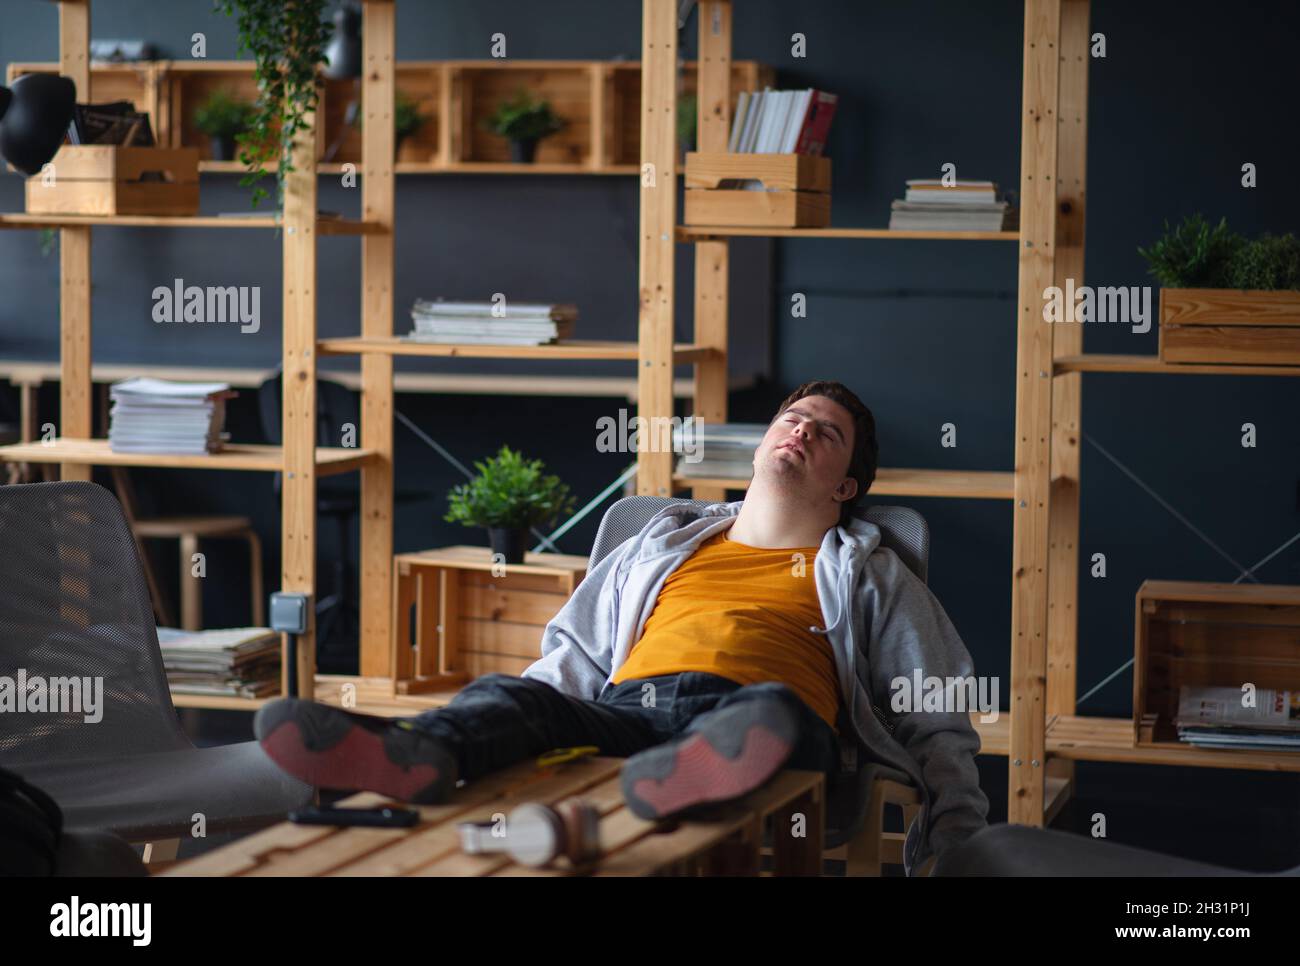 Young tired man with Down syndrome sitting indoors at school, taking break Stock Photo